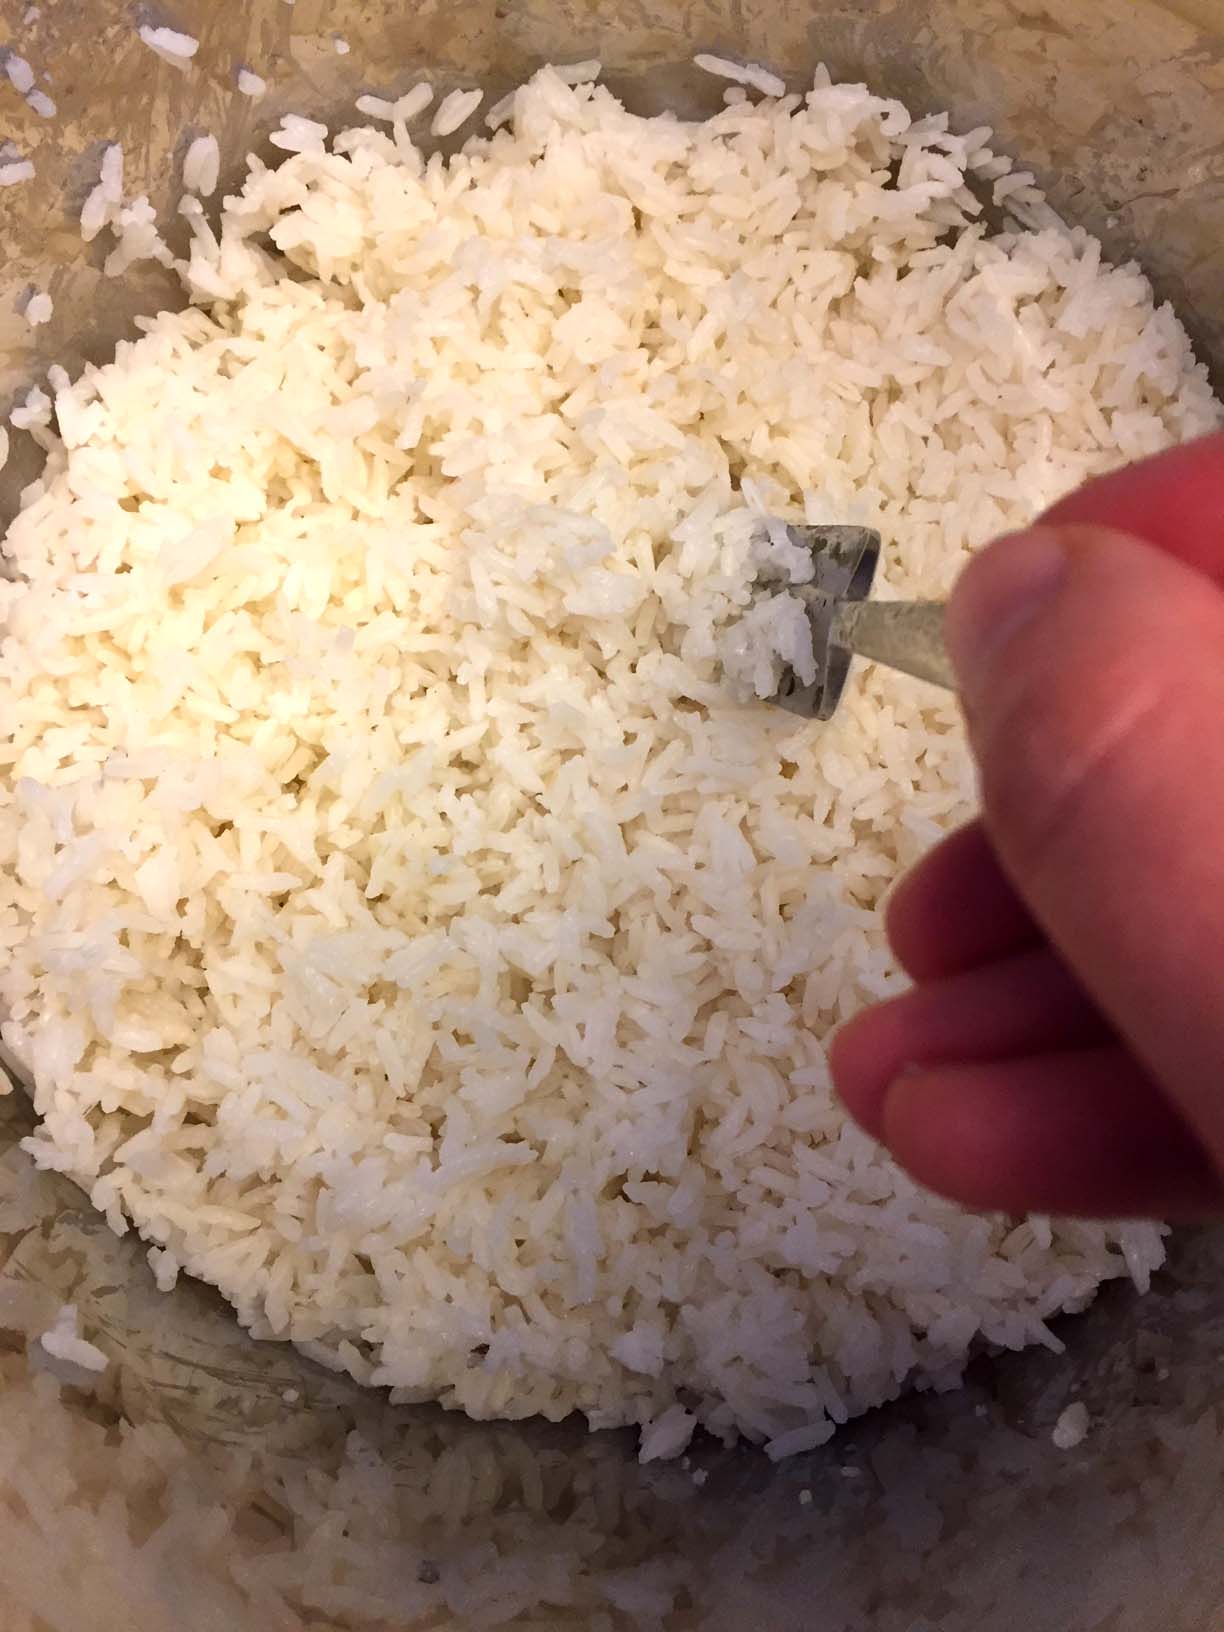 How to Cook Rice in a Pot